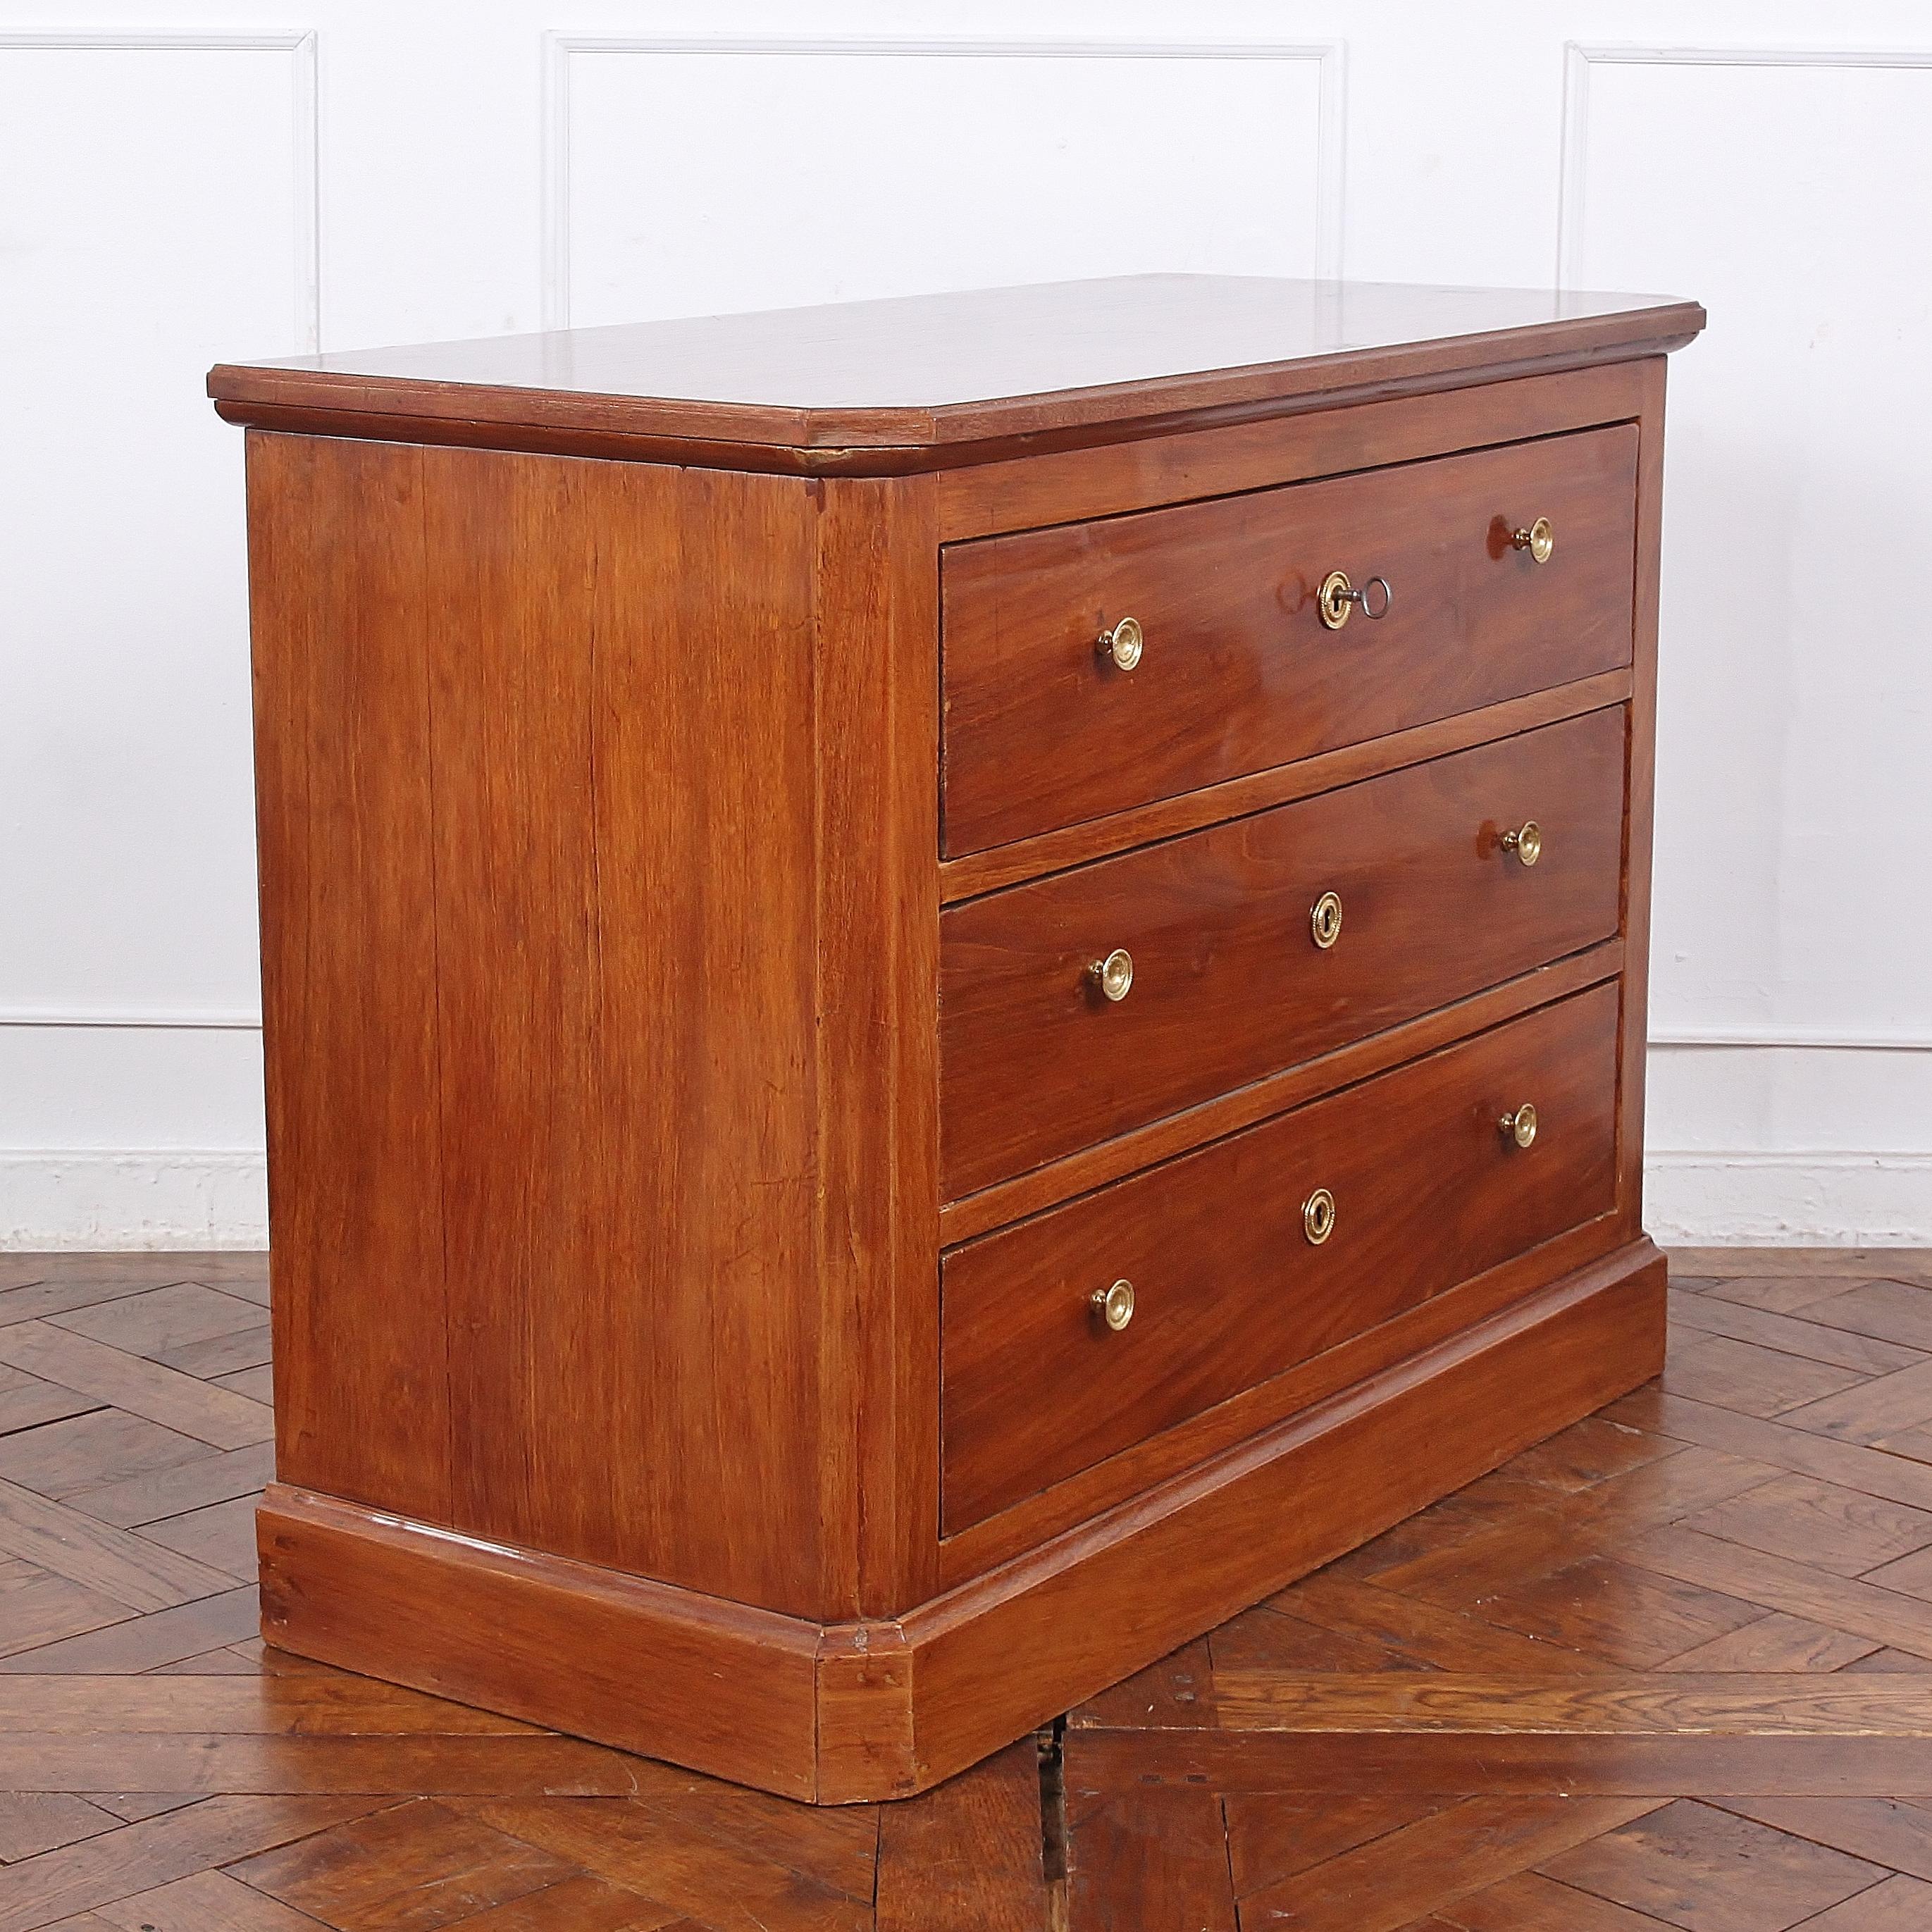 A simple mid-19th century three-drawer Directoire style French commode or chest of drawers in mahogany, the simple geometric case with canted corners and raised on a plinth base. Mellow colour and warm patina.

Provenance from Coco Chanel’s ‘Villa